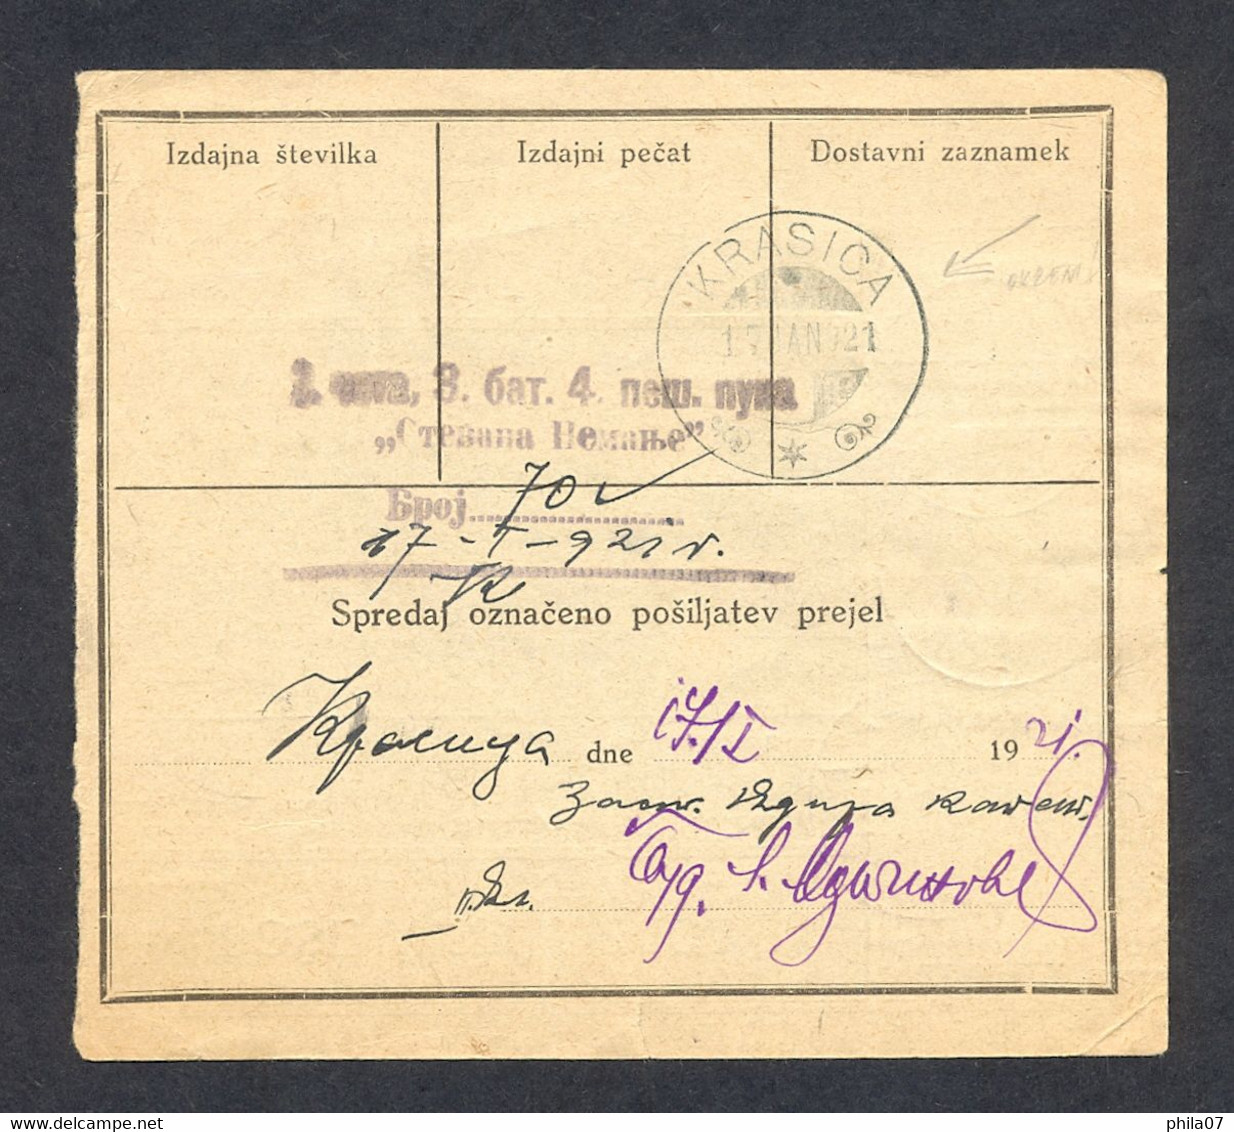 Yugoslavia, VERIGARI (chain Breakers) On Parcel Card Sent From Ratkovica To Krasica 14.01. 1921. Arrival On The Back. - Lettres & Documents